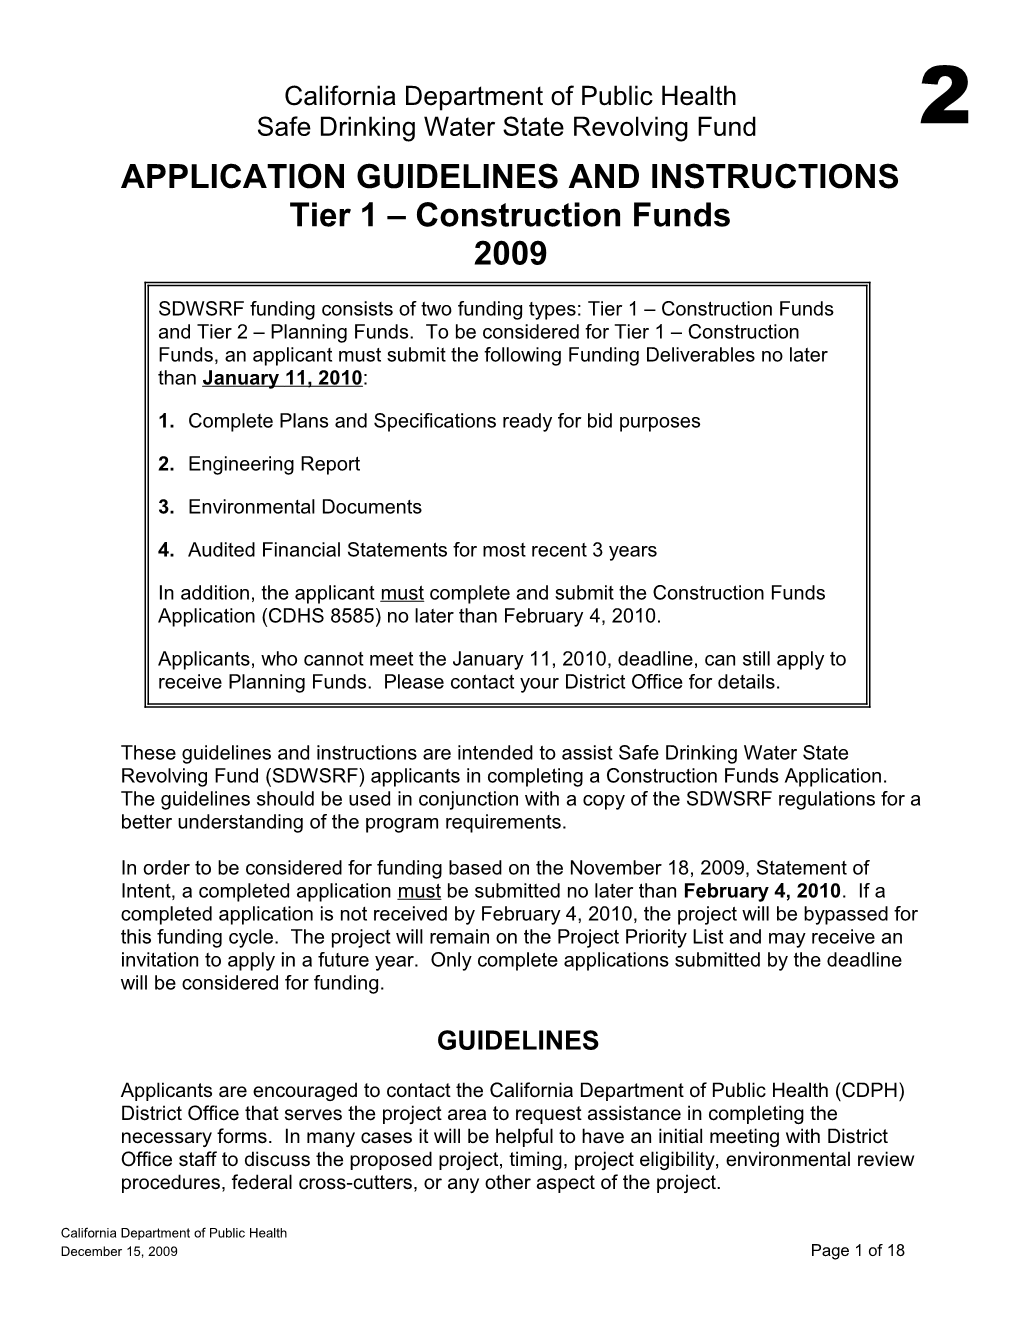 Application Instructions and Guidance